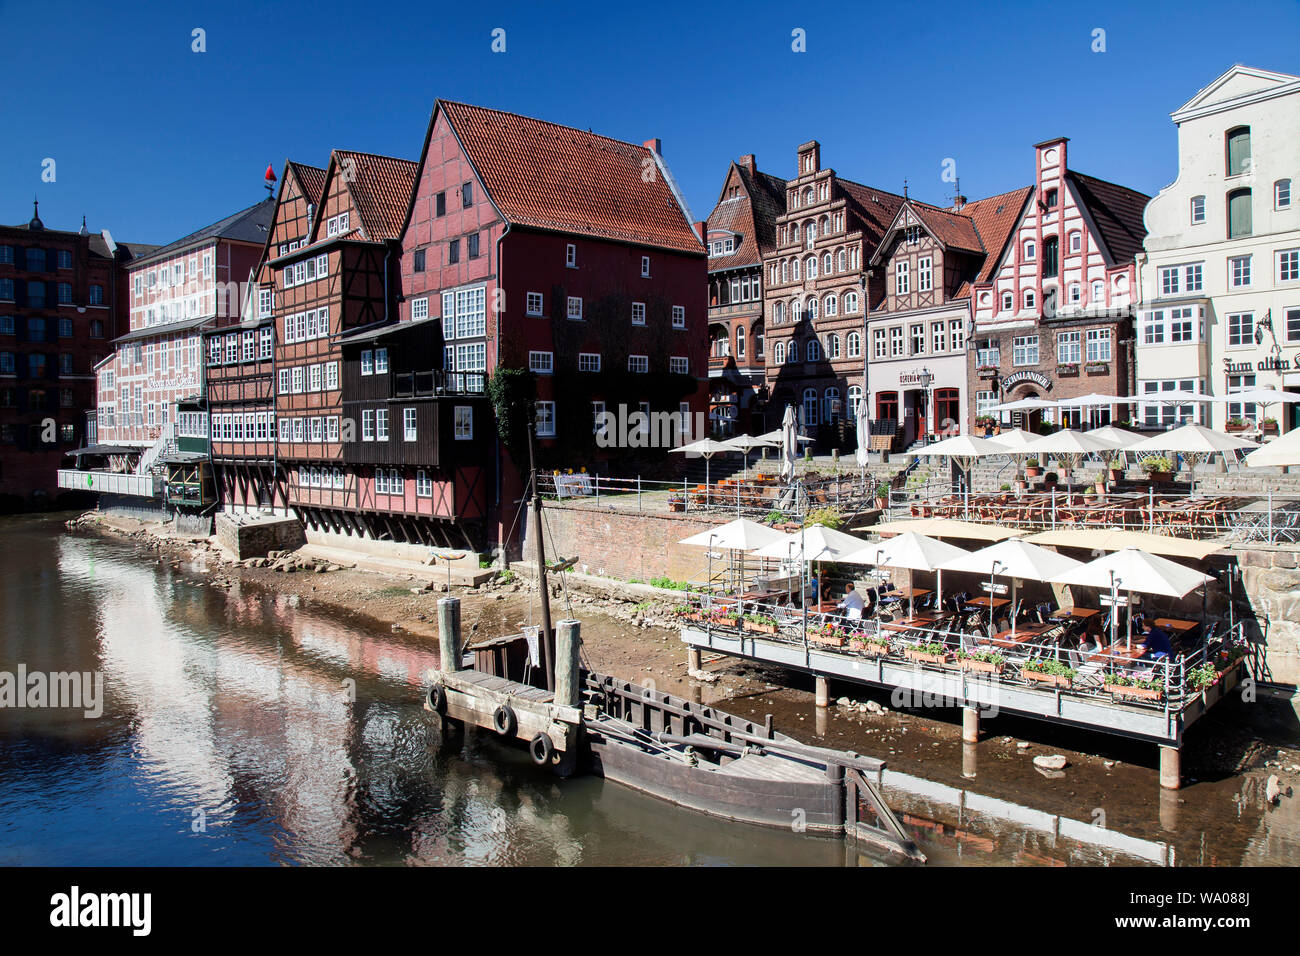 Half-timbered houses in the old town of Lüneburg on the Ilmenau, Lueneburg, Germany, 30057085 *** Local Caption *** Stock Photo